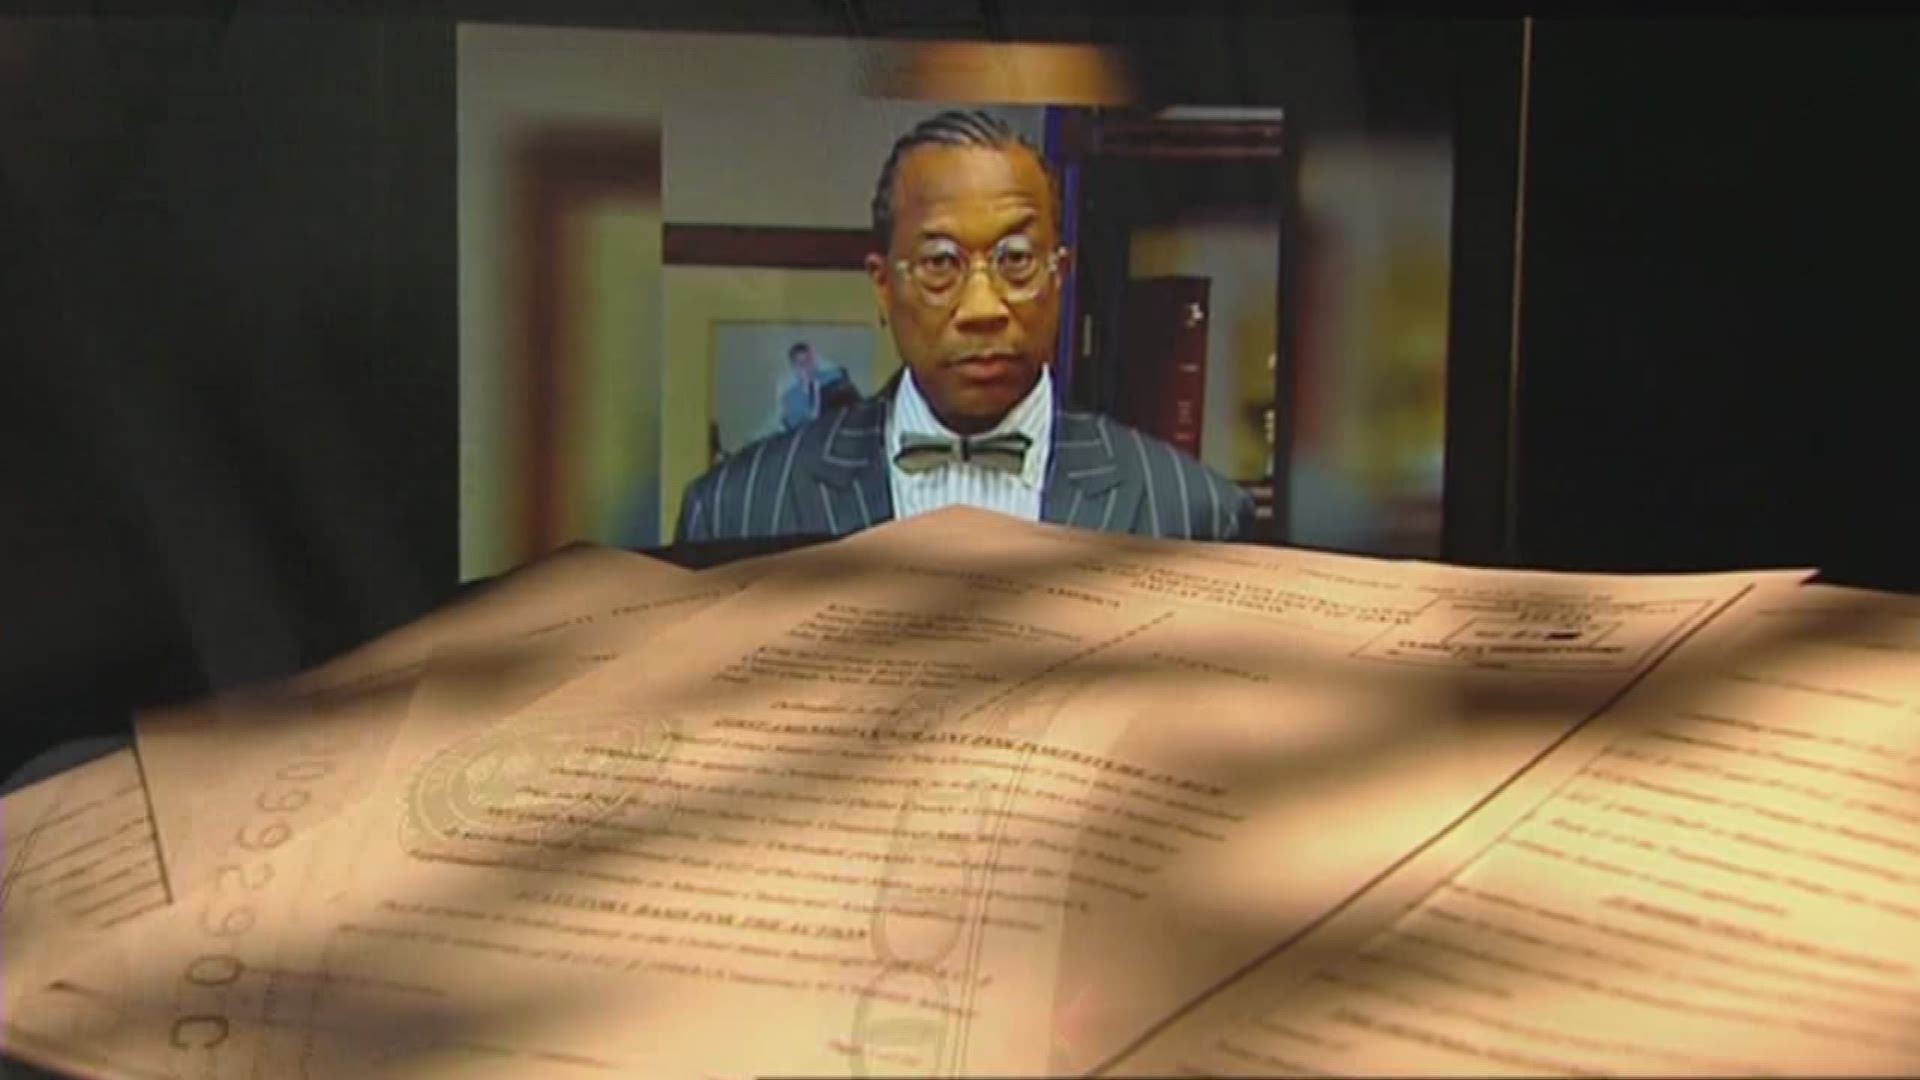 John Wiley Price found not guilty, but could face retrial on tax counts